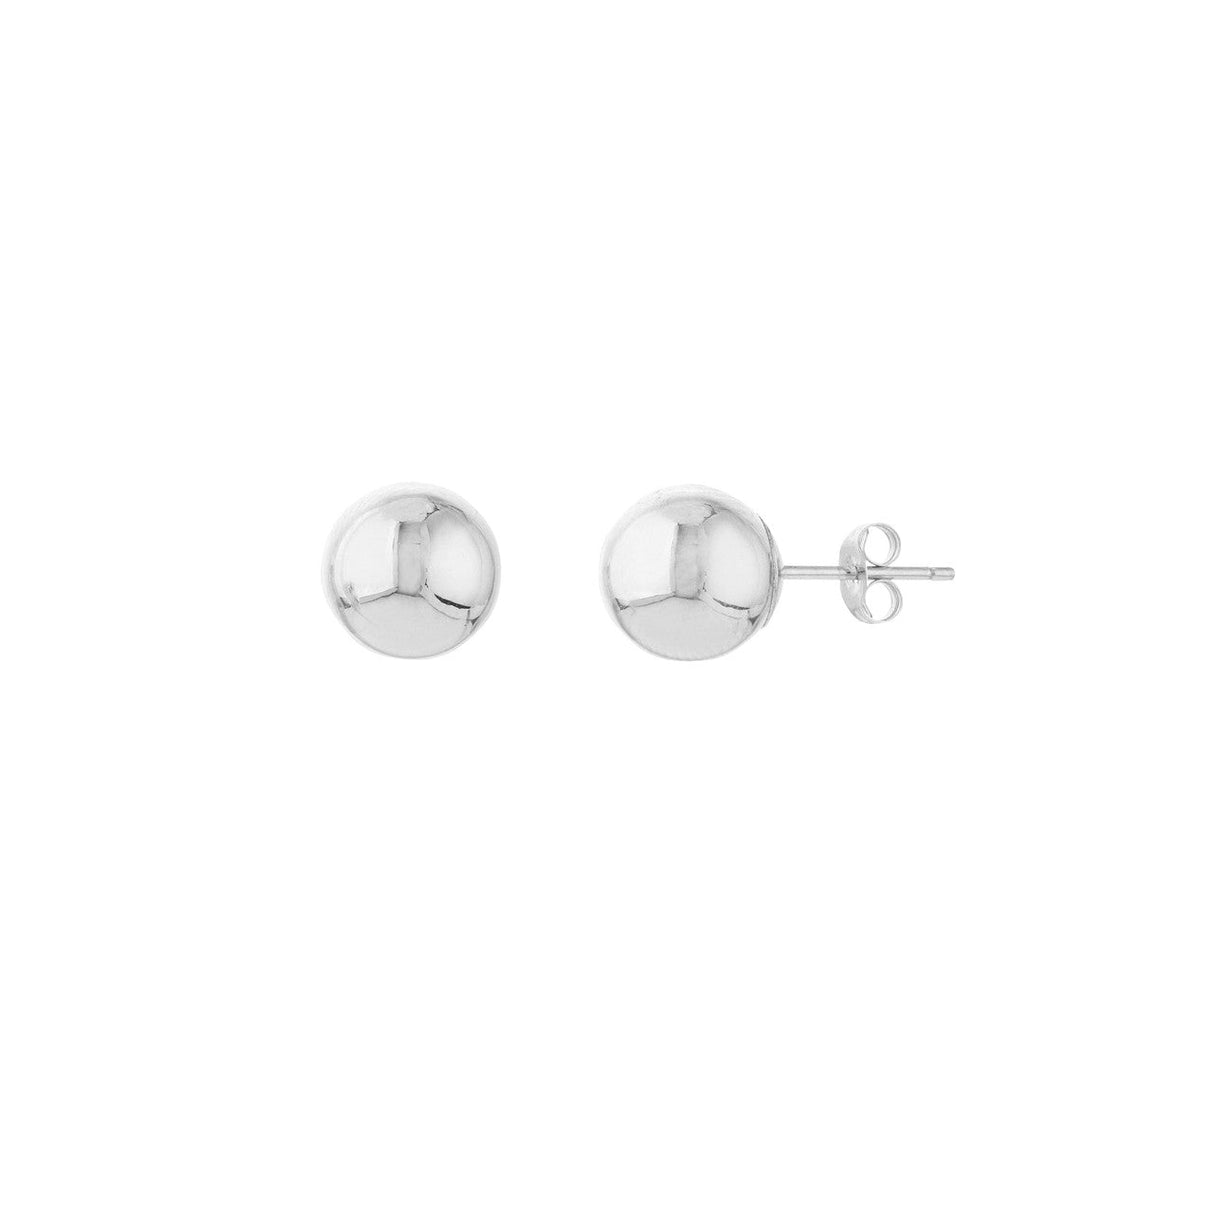 14K Gold Earrings 2023 Collection, 8mm Polished Ball Stud Earrings  Spoil yourself or someone special with these precious 8mm 14K gold ball earrings from the 2023 collection. Perfect for any special occasion or just to show your love, these classic and timeless earrings are sure to impress! Highlight any outfit with elegant and fashionable Diamond Origin gold jewelry.  gift for her,  birthday gift,  small gold gift,  love gift,  Gold earring for all occasions gift,  Gold ring from Diamond Origin,